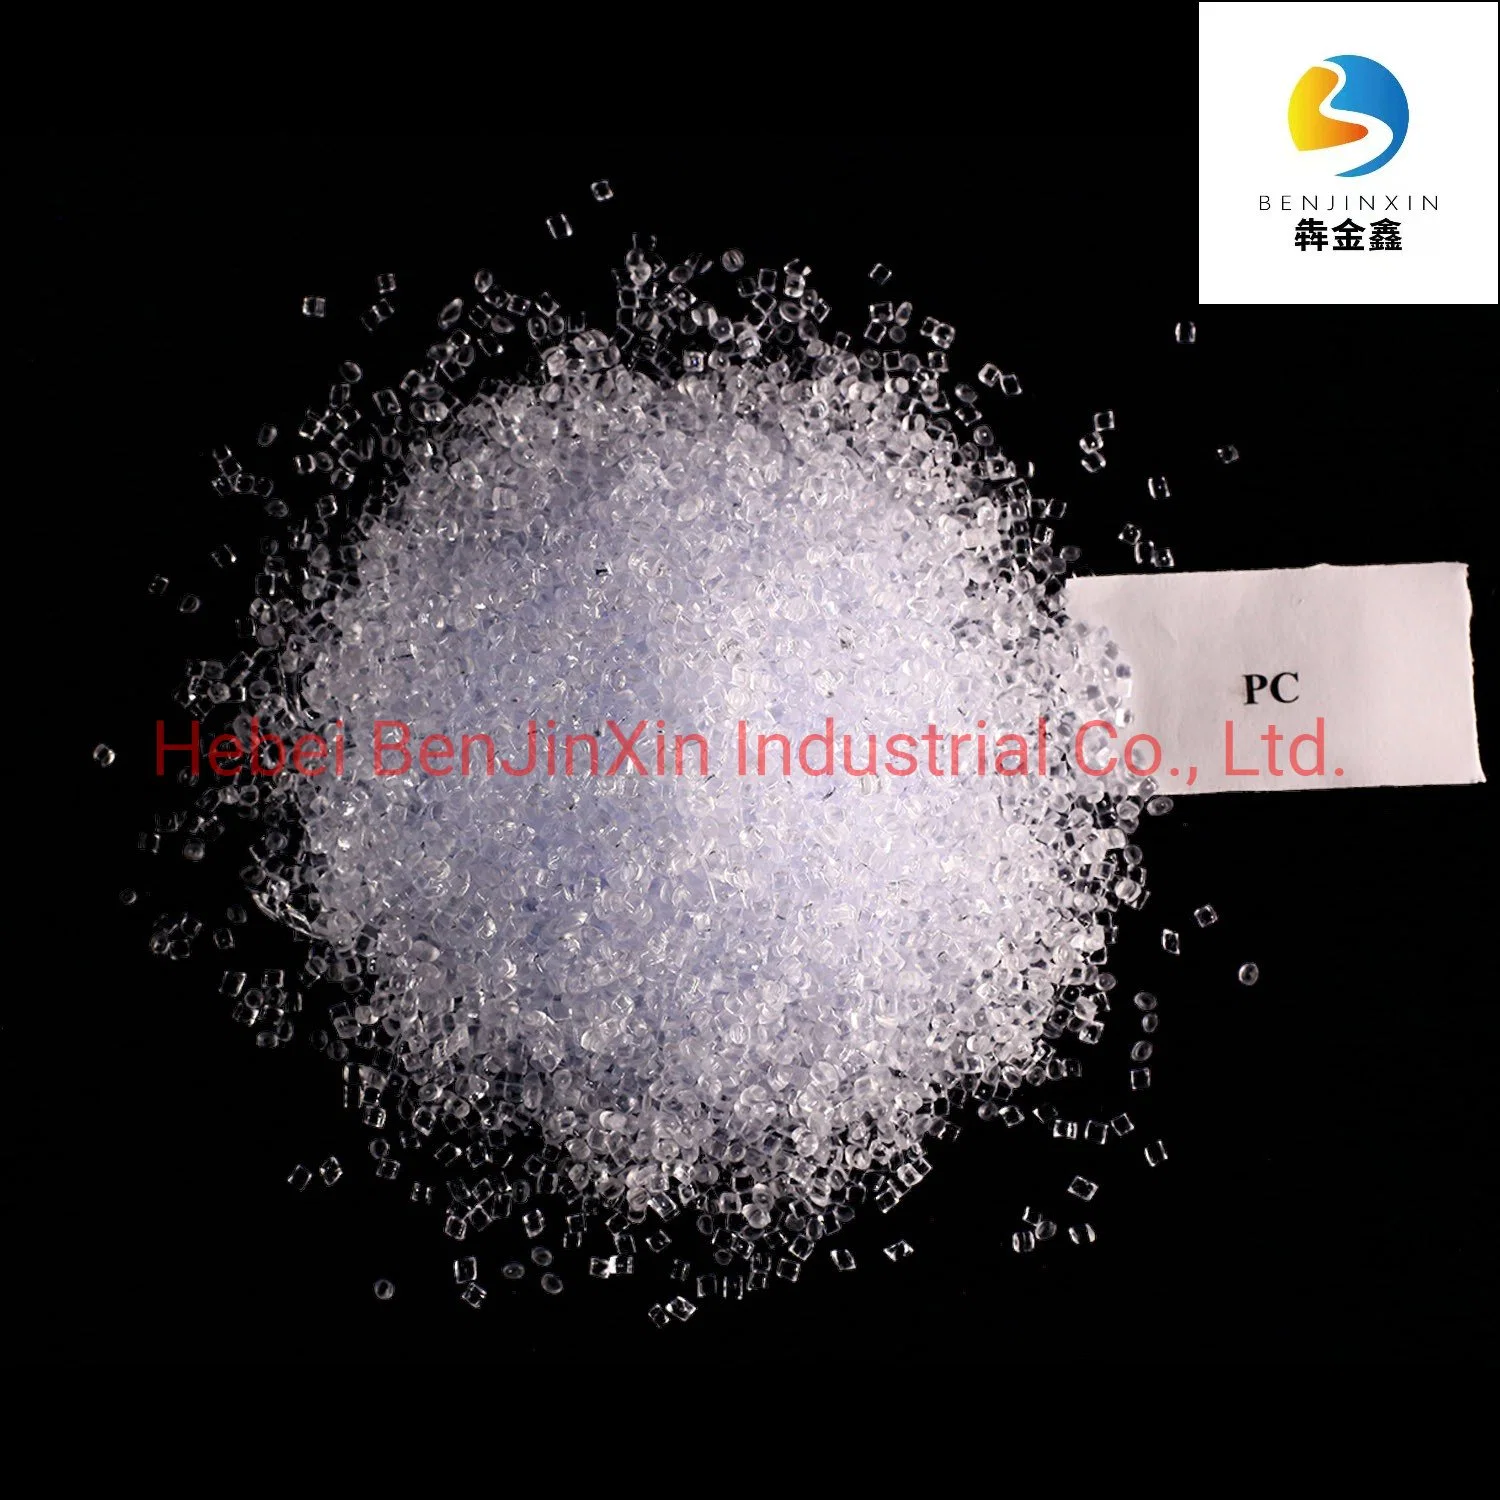 PC Granules PC PC1809 Heat and Impact Resistant Polycarbonate Plastic Raw Material Virgin & Recycled